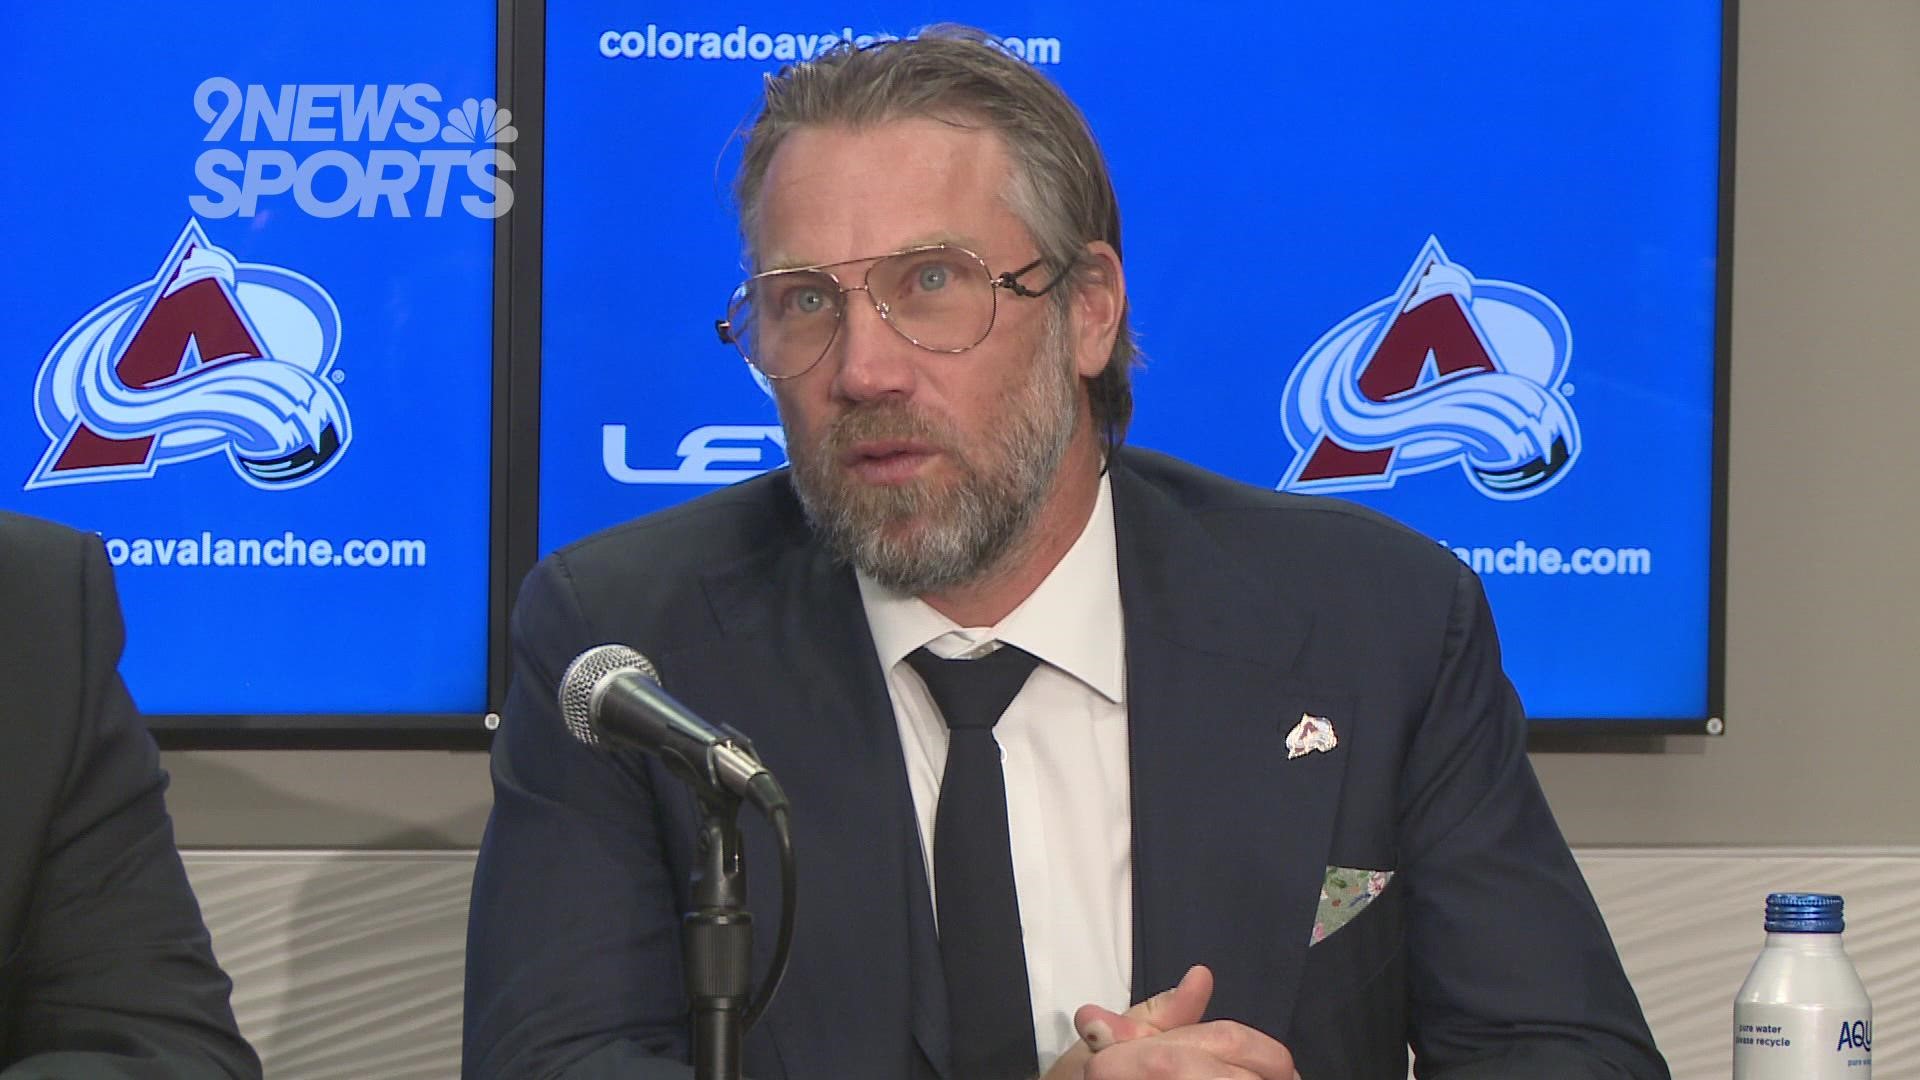 Adam Foote and Peter Forsberg, who played on Pierre Lacroix's championship Colorado Avalanche teams, tell stories of their late GM.